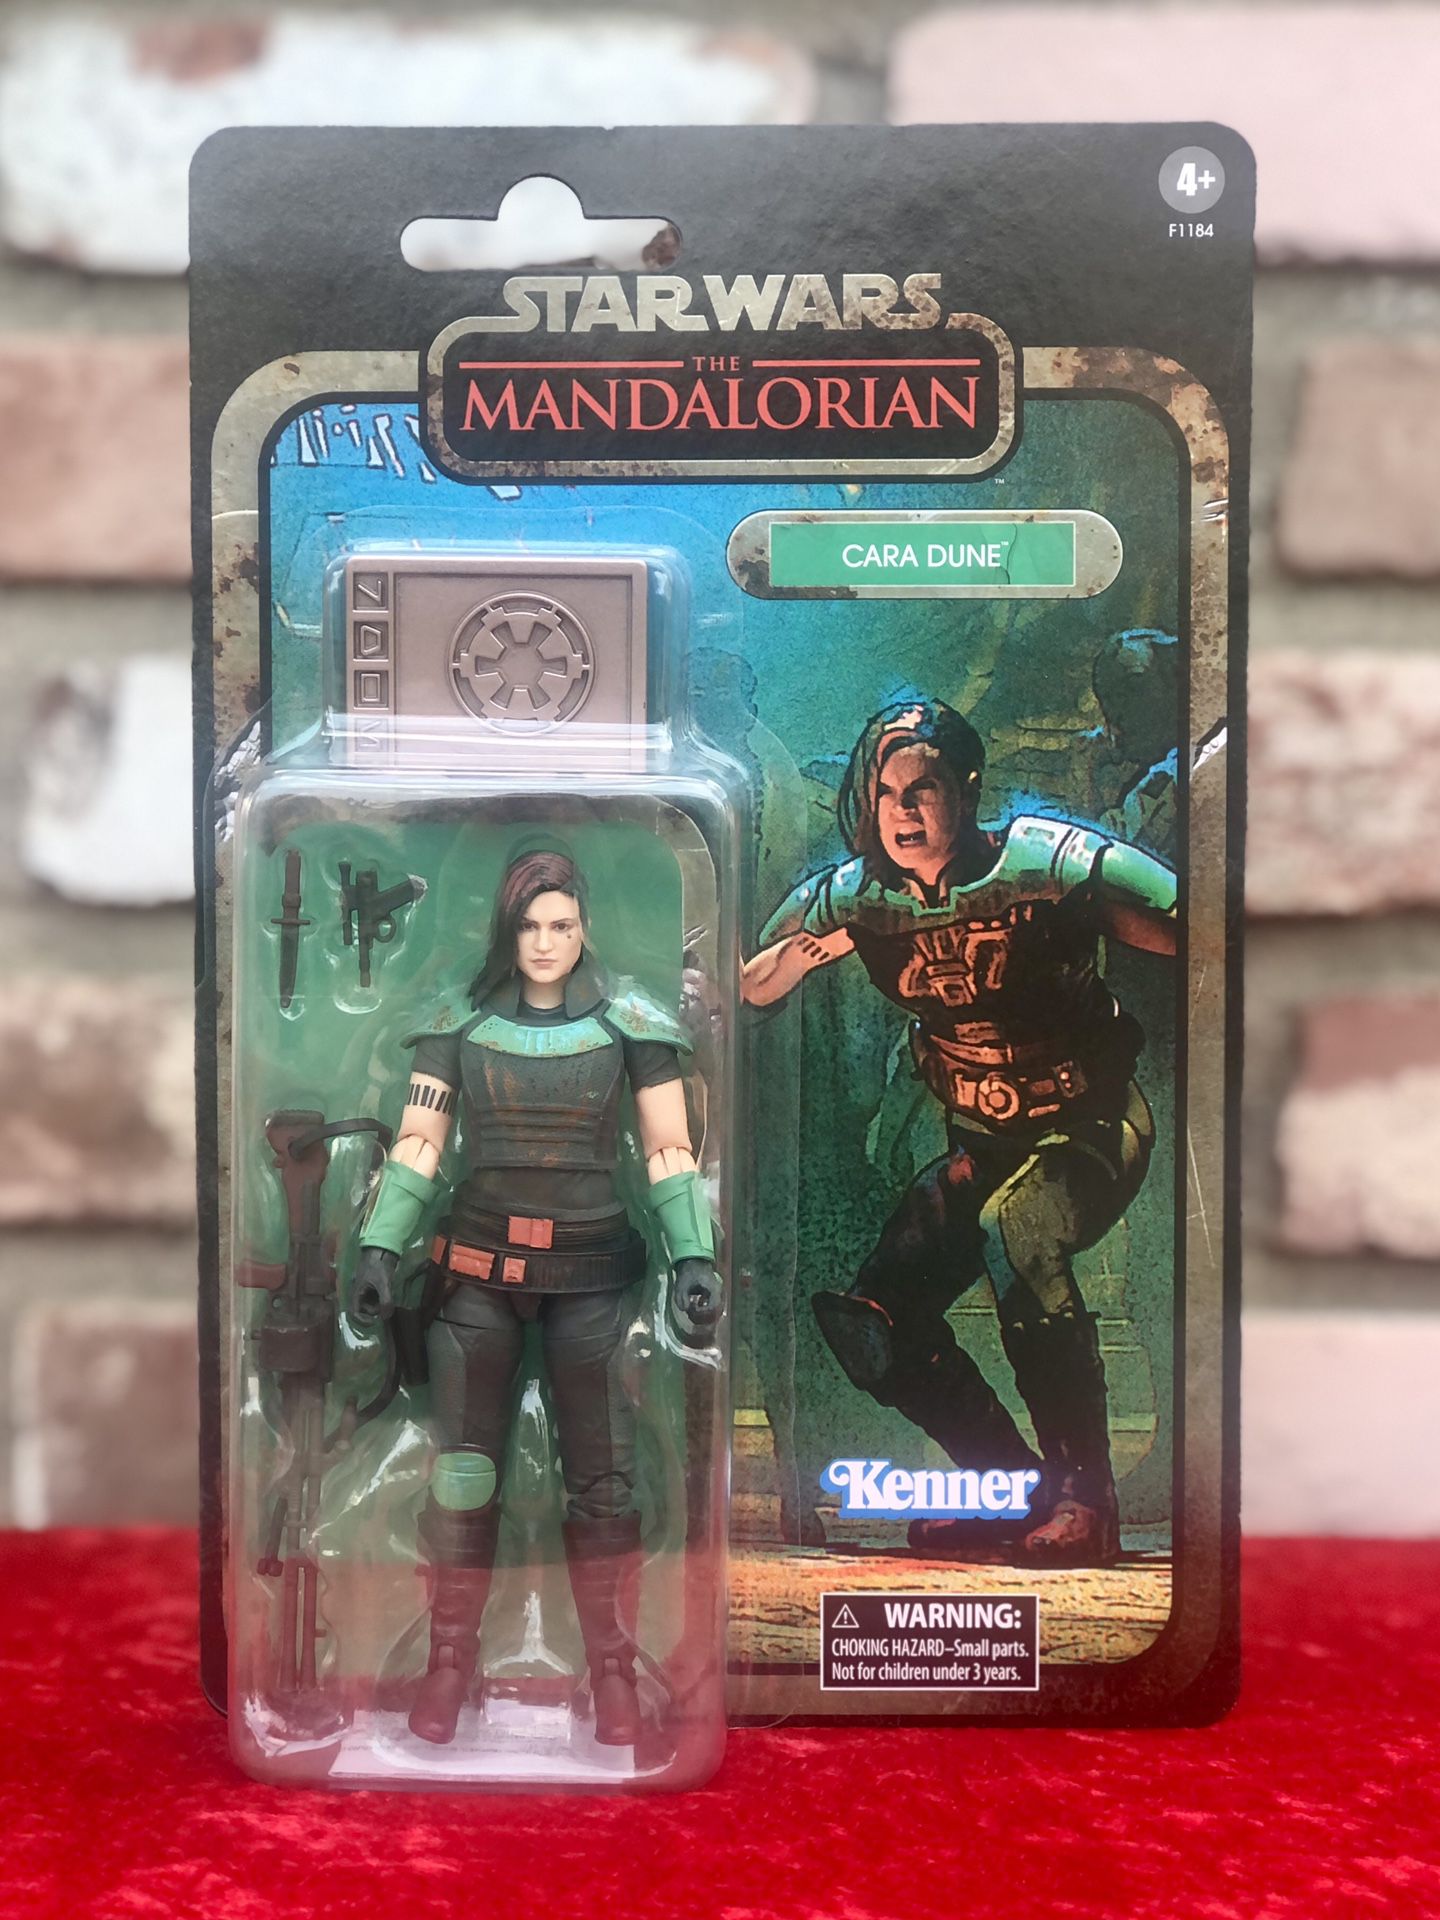 Star Wars The Mandalorian The Black Series CARA DUNE 6 Inch Scale Credit Collection Action Figure